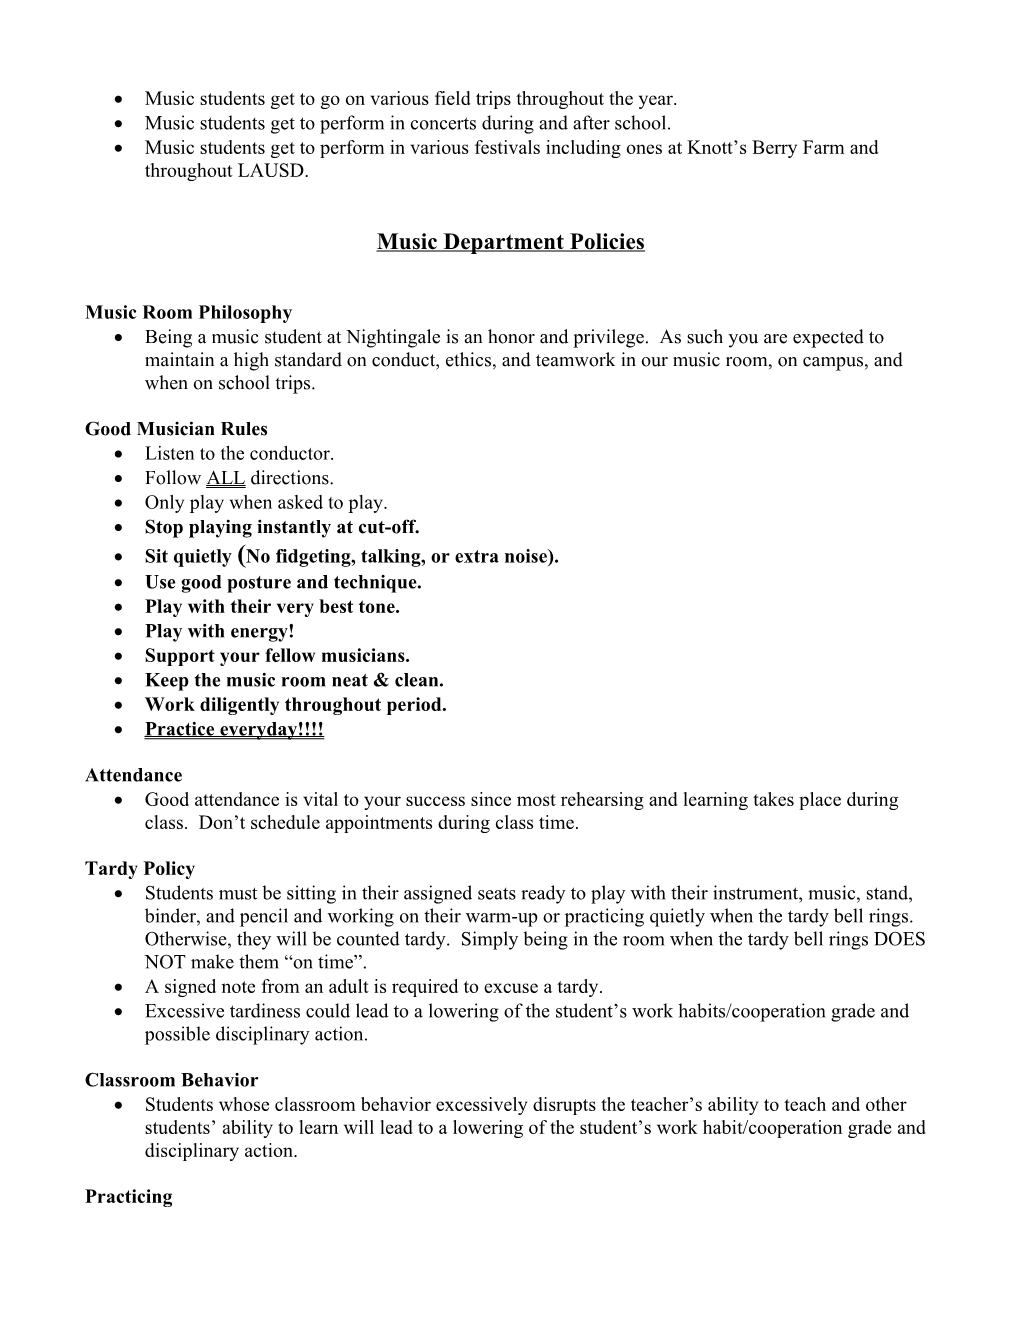 Music Department Information Packet